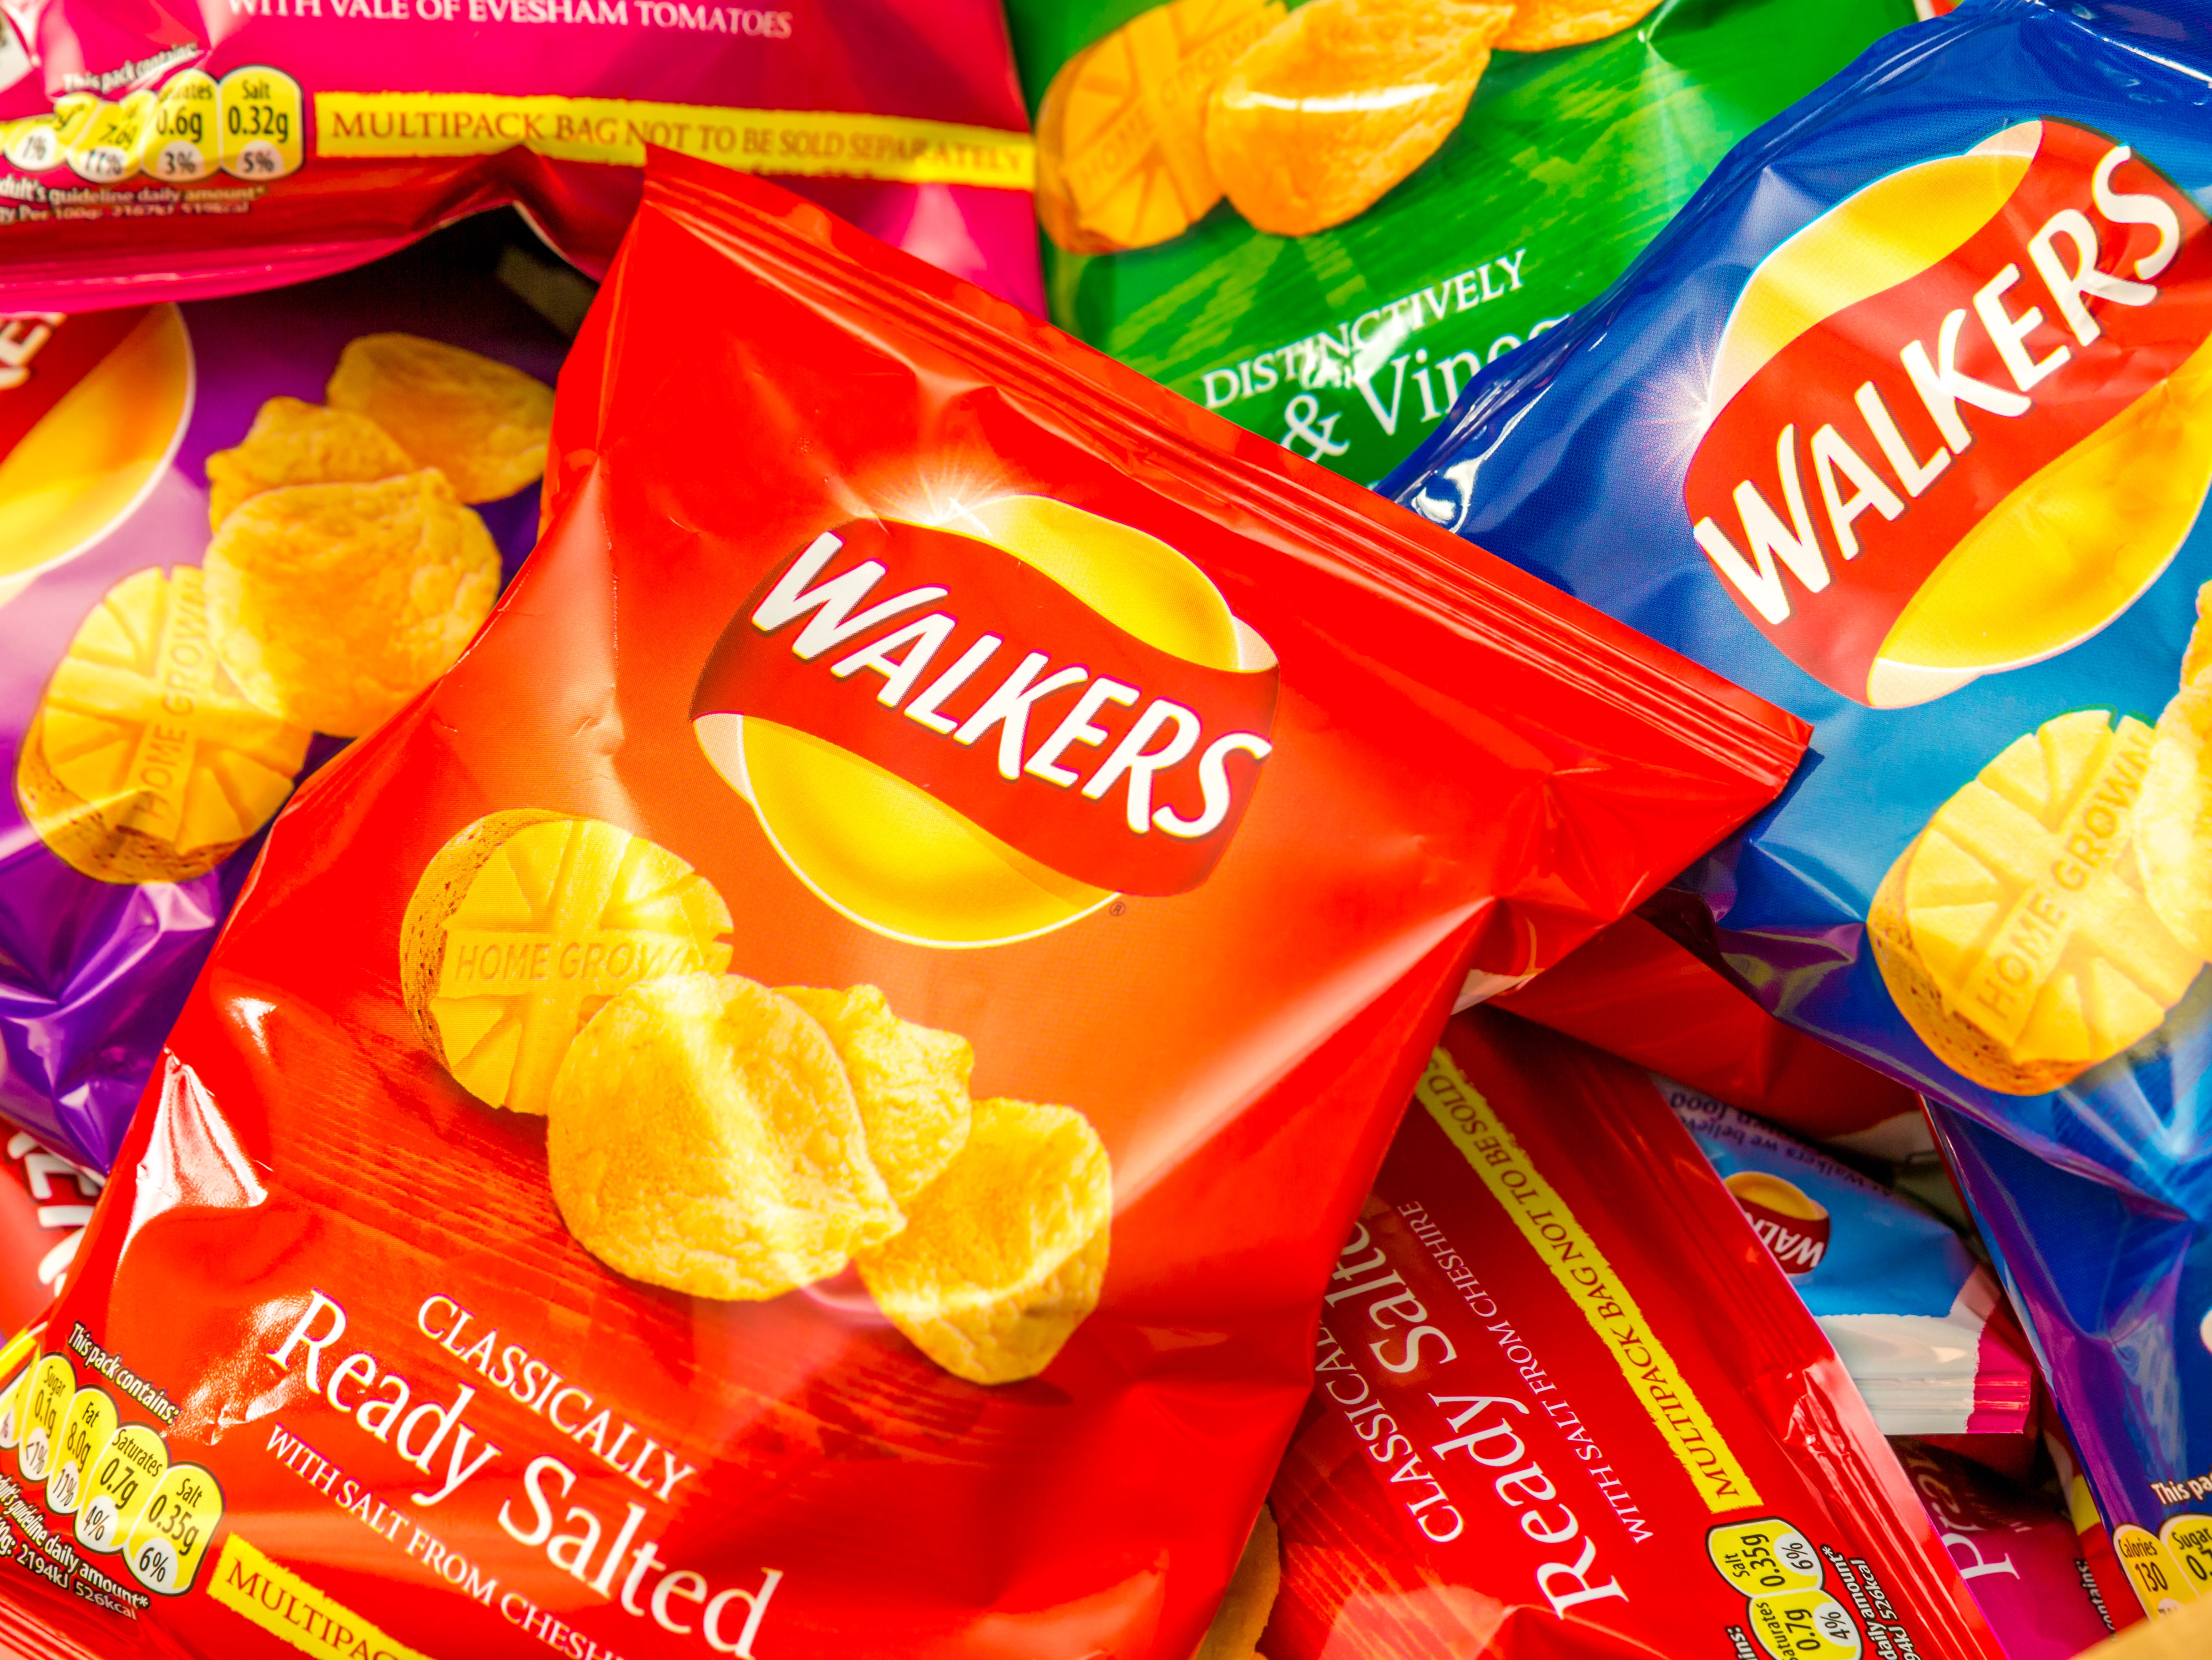 Walkers is experiencing shortages of some of its crisps following an IT glitch